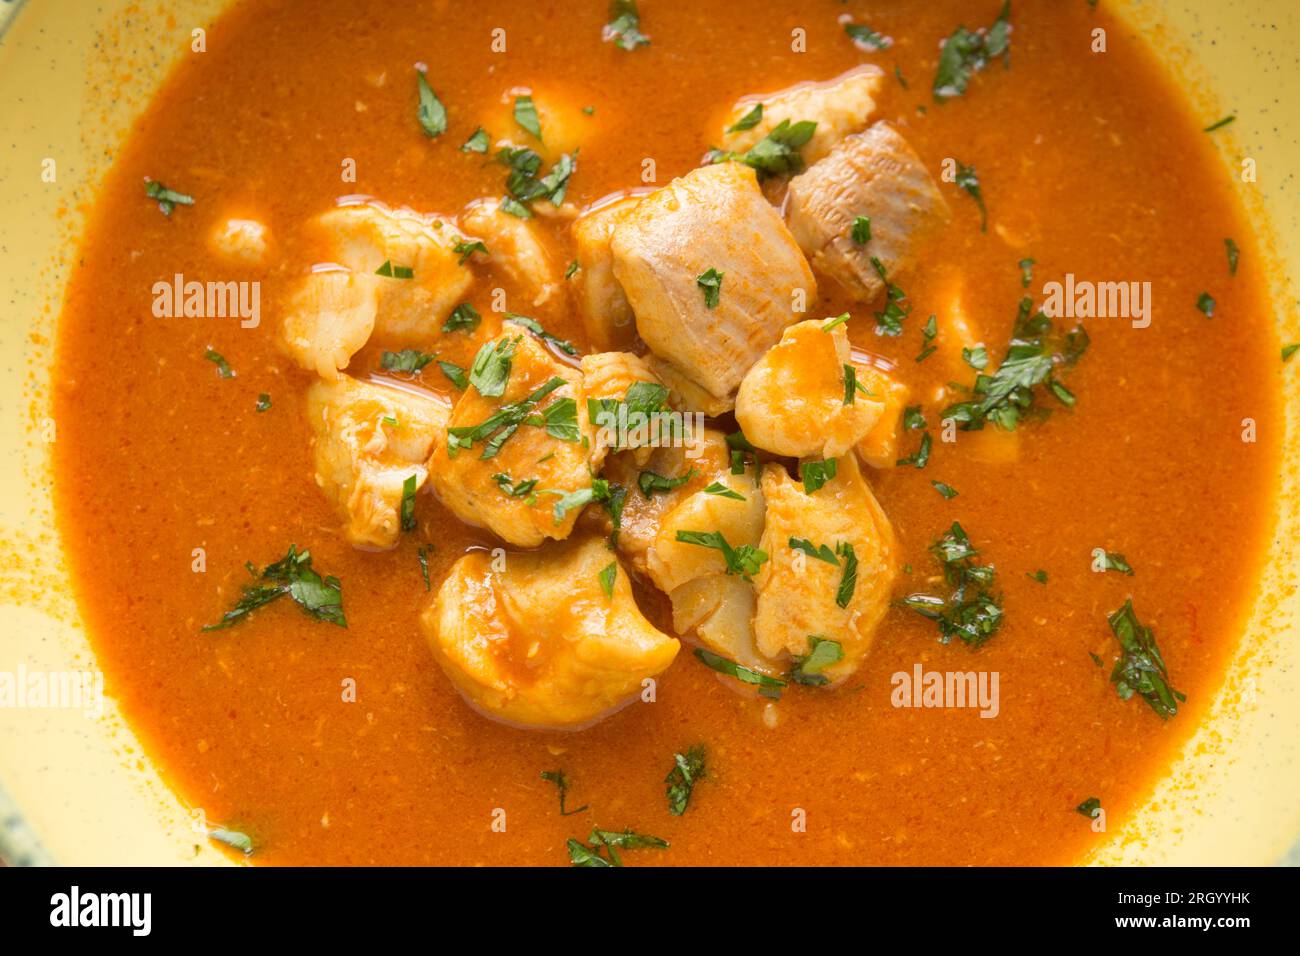 A bowl of fish stew or bouillabaisse, that has been made with king scallops, smooth hound, anglerfish also known as monkfish and gurnard fillets. Engl Stock Photo